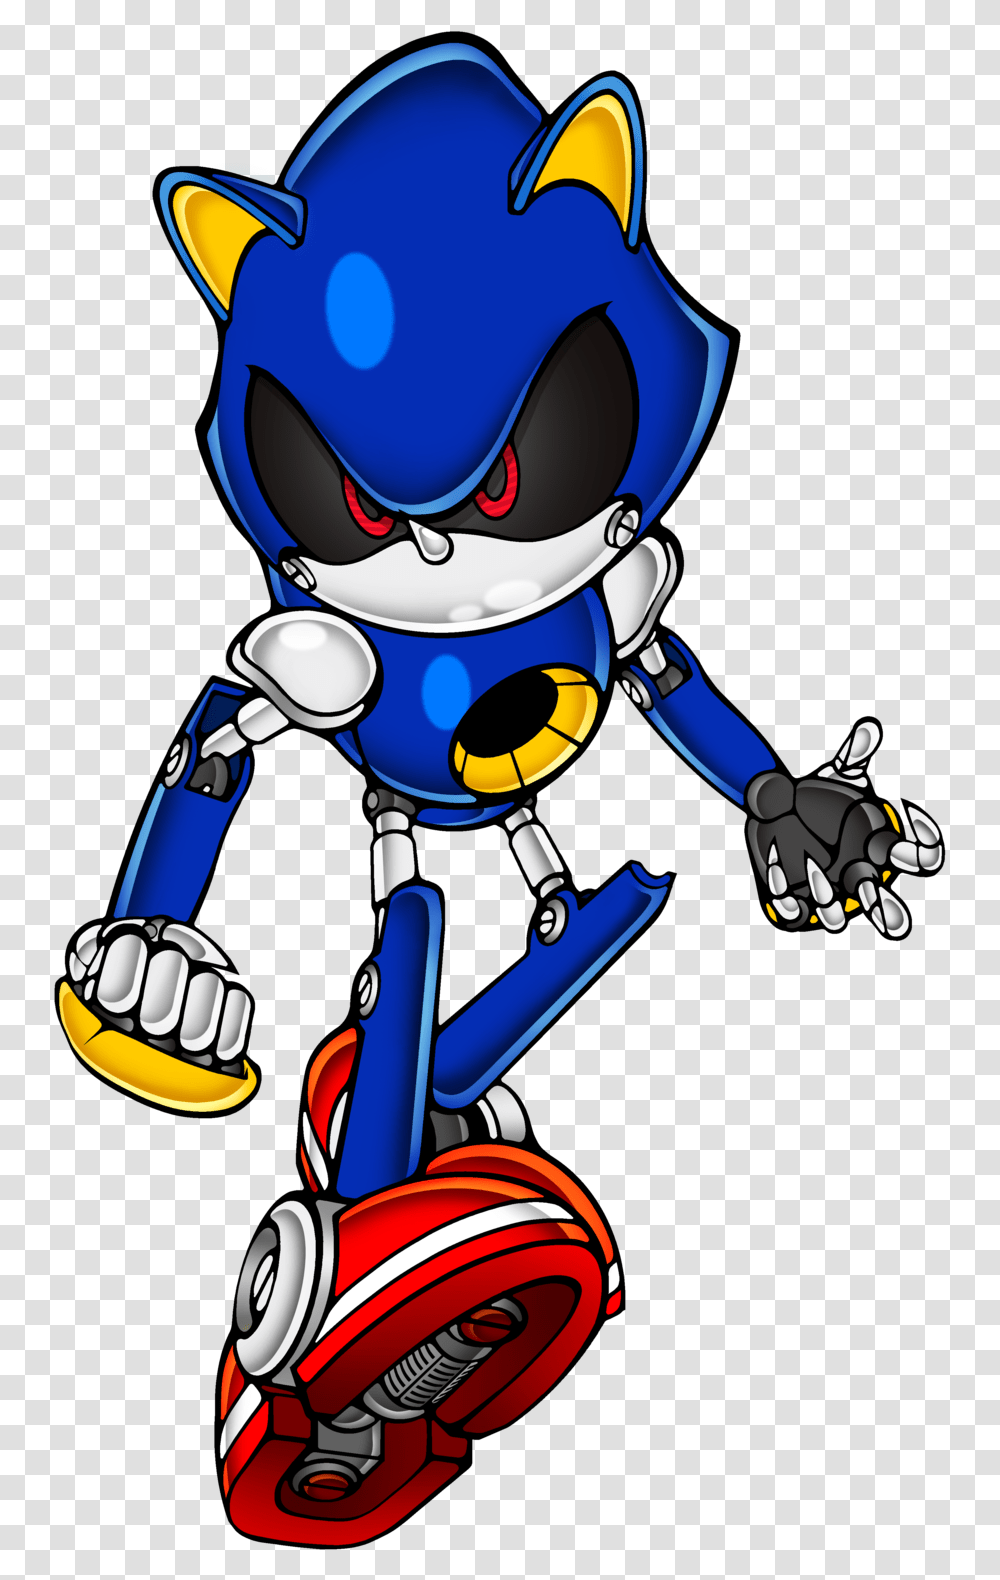 Metal Sonic Artwork Only By Envy The Hedgehog D351sap Metal Sonic, Robot, Toy, Hand Transparent Png